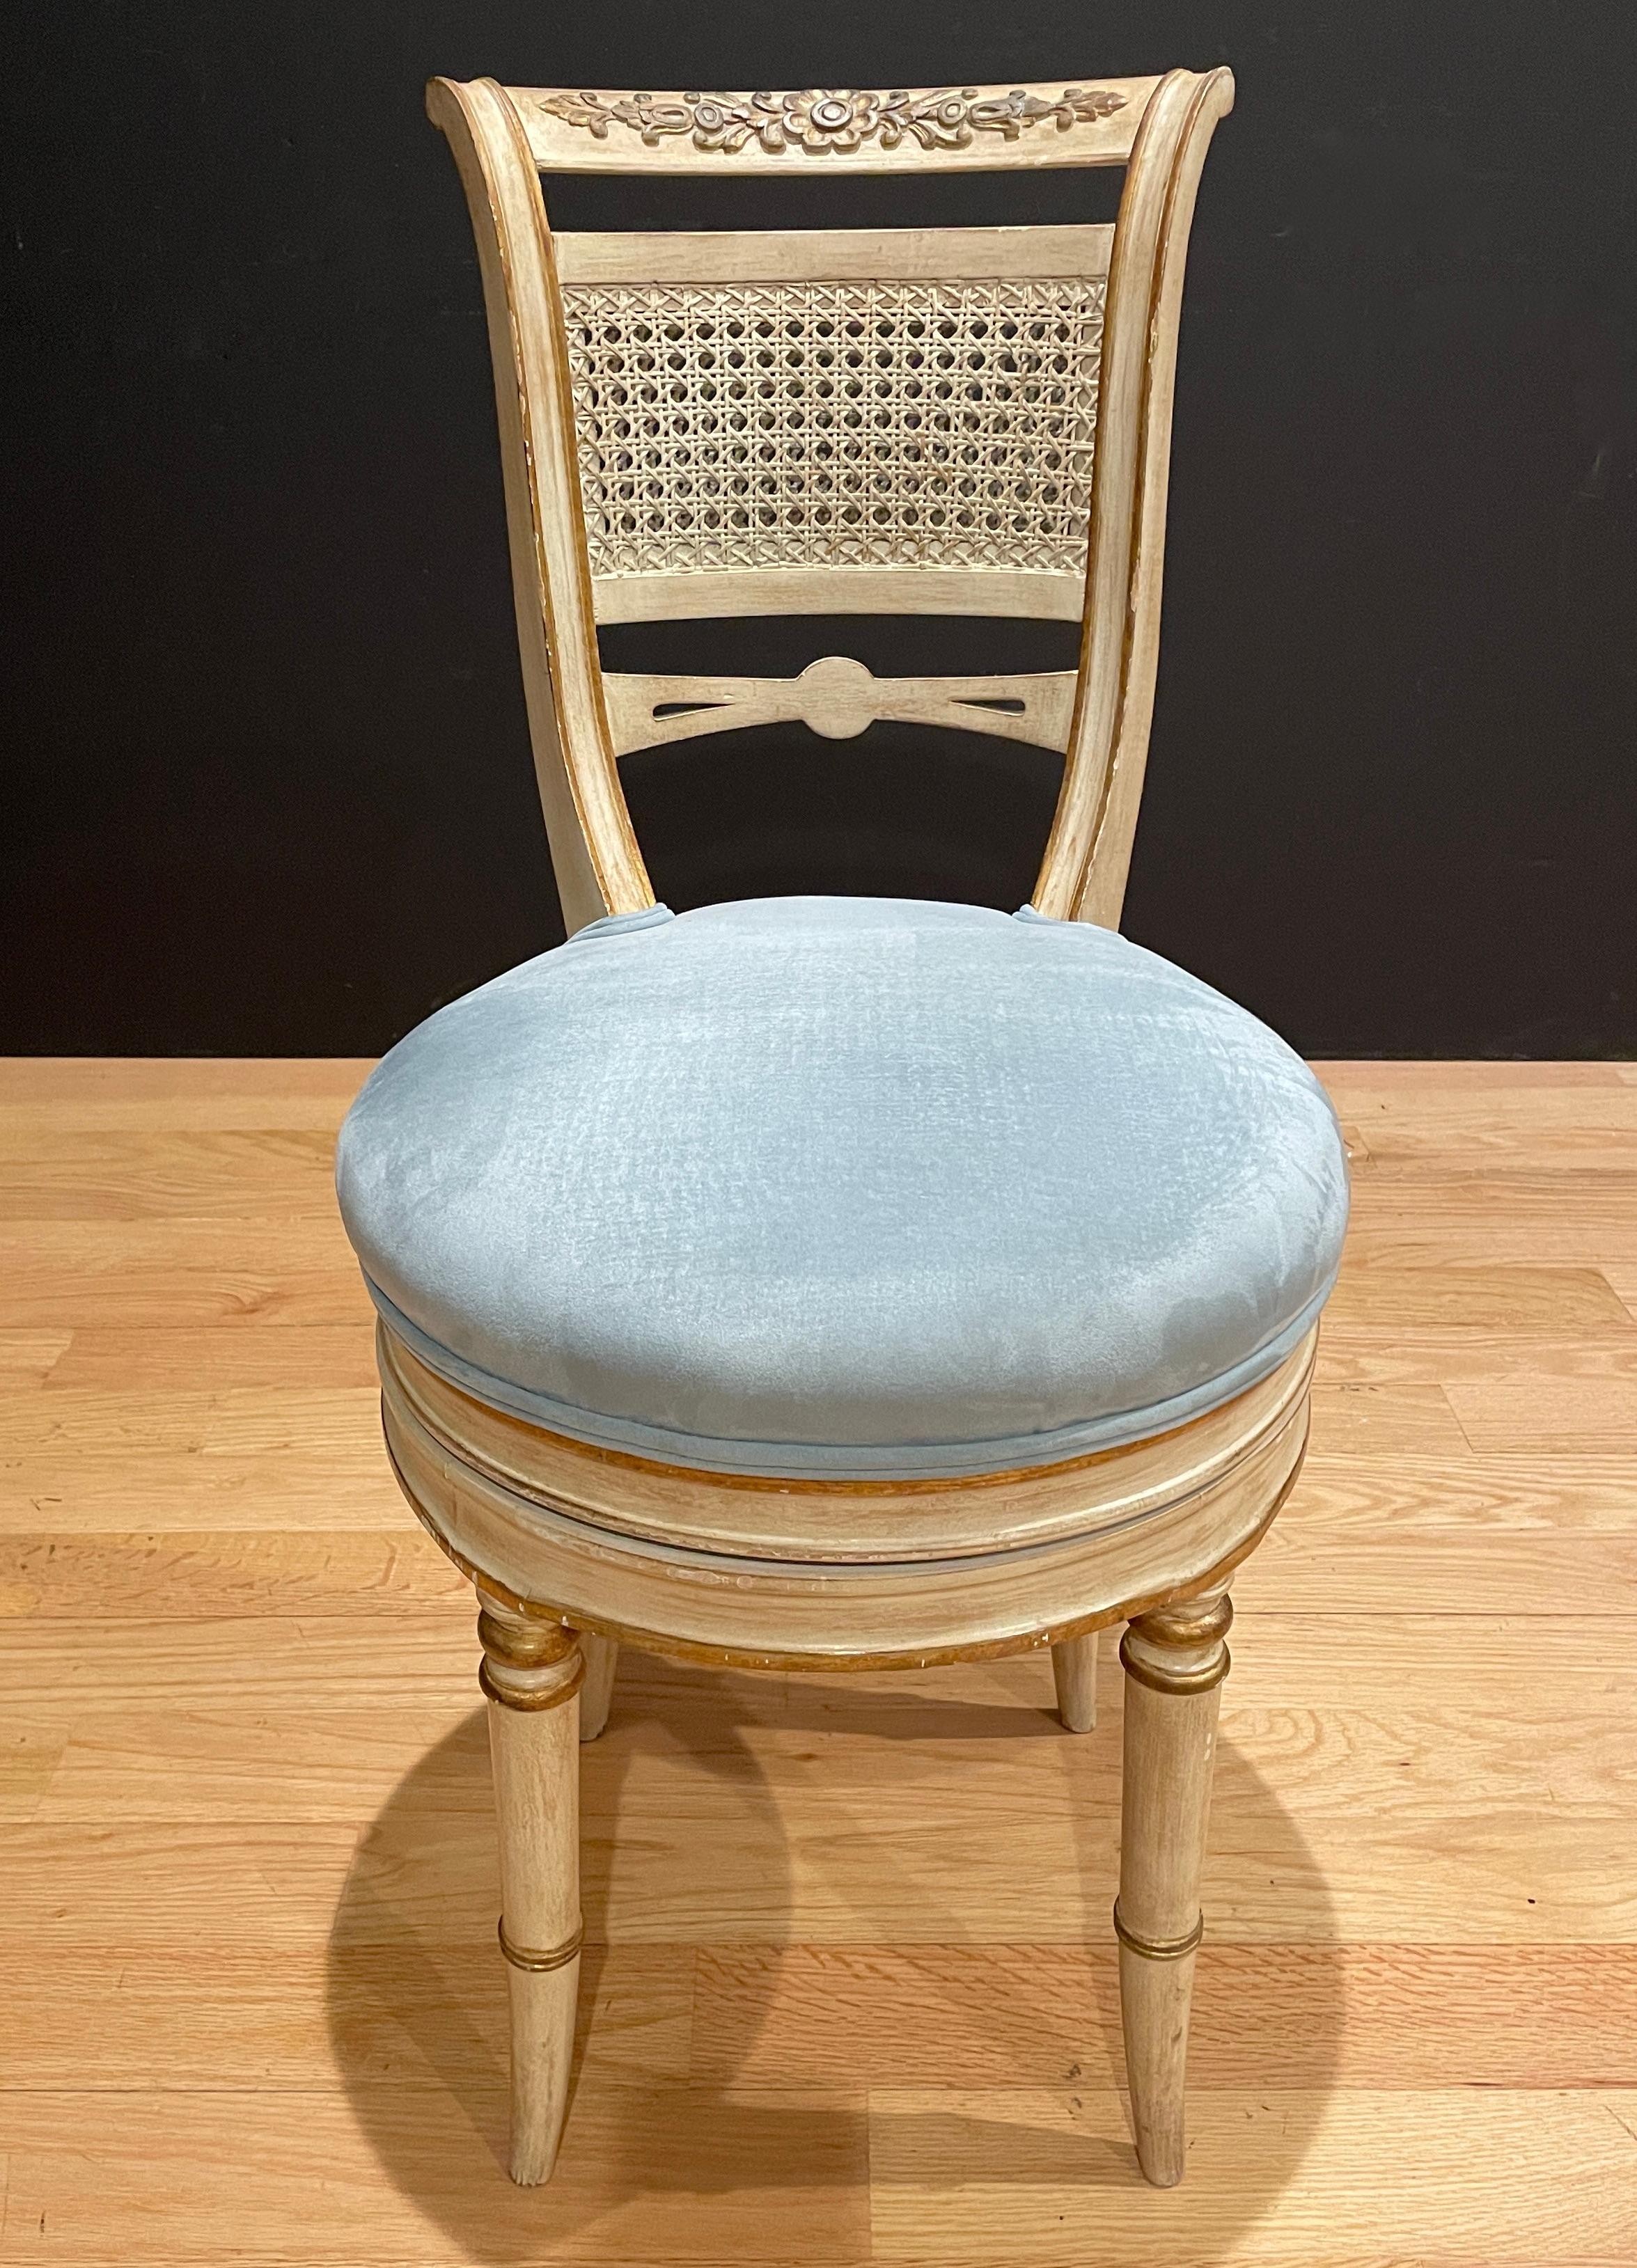 White painted and gilt classical design vanity/dressing/music chair. Blue velvet upholstery with hand carved and gilt details with double canning back. Chair swivels but does not adjust up.